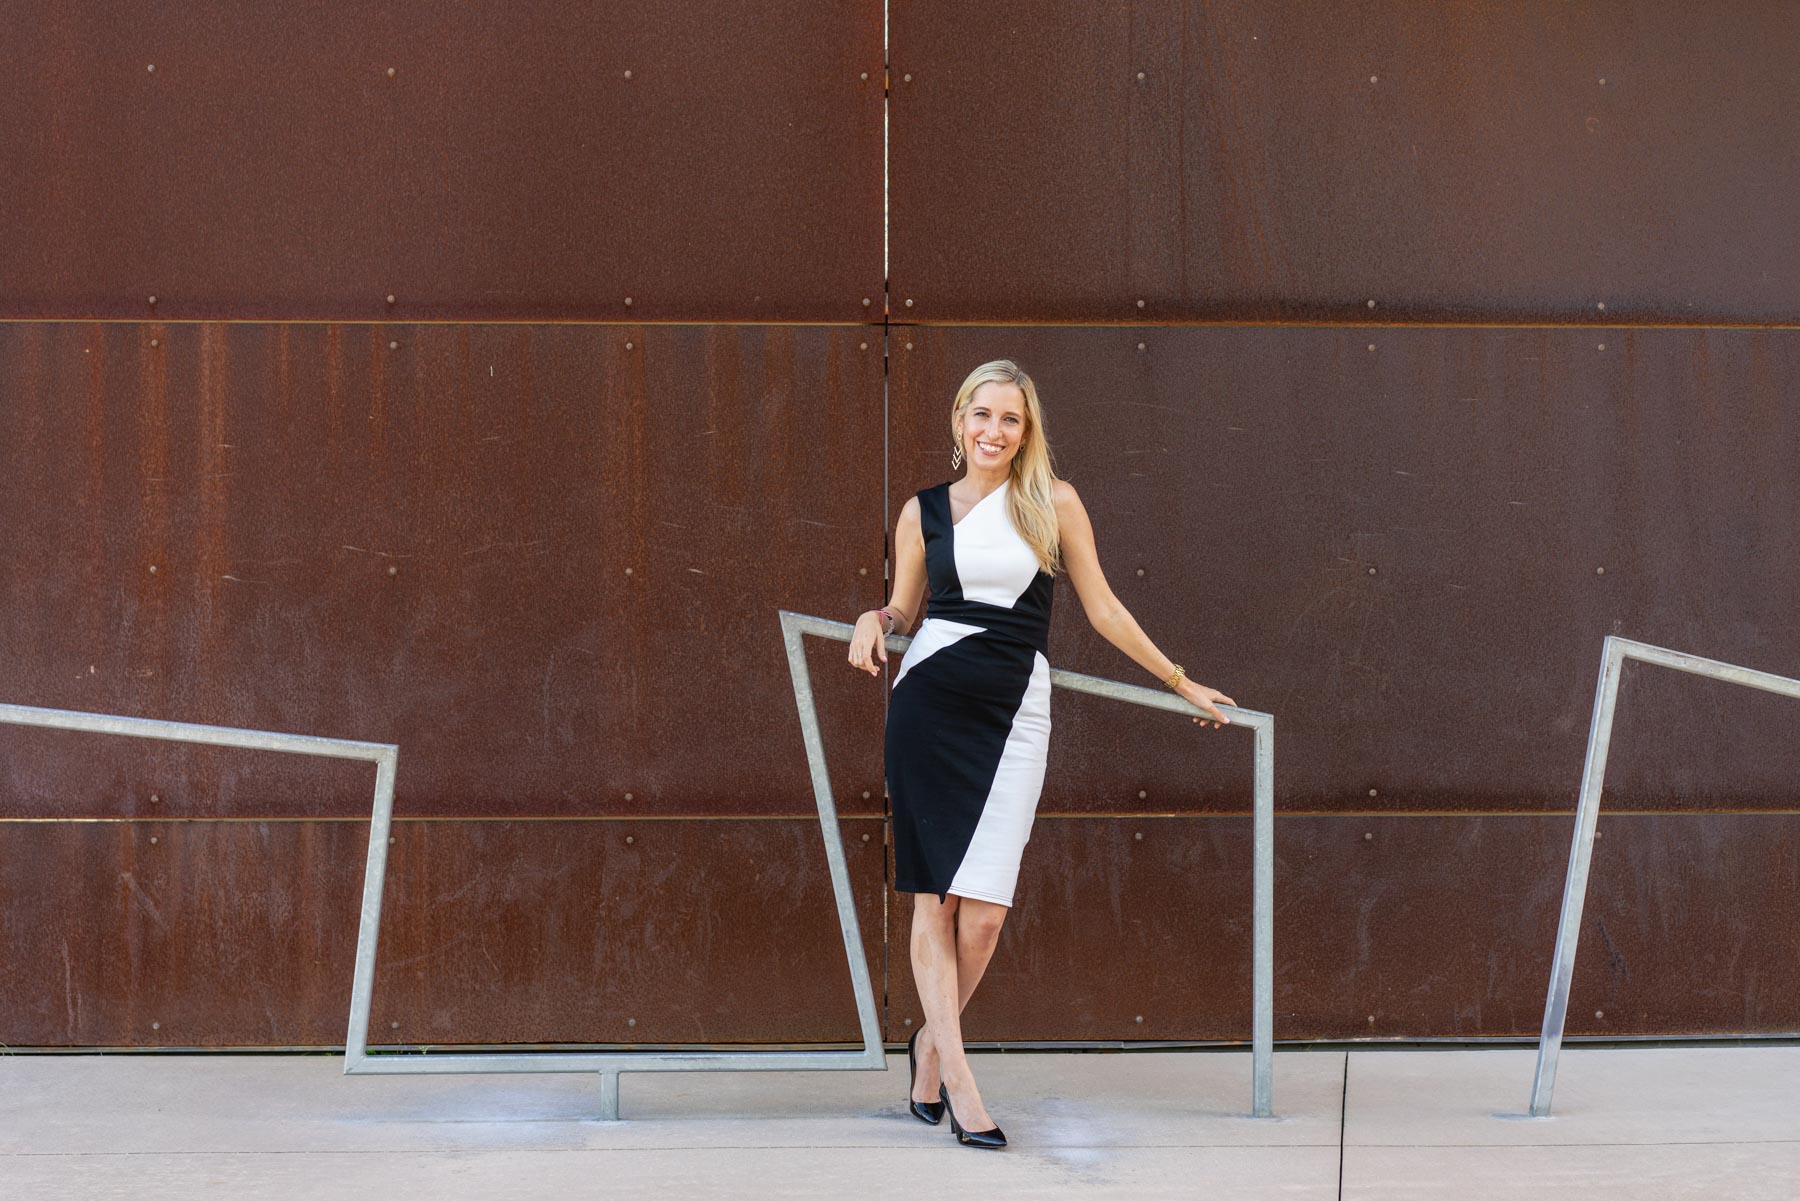 Marketing brand headshot of a woman in a black and white dress standing in front of a rust-colored, industrial wall 